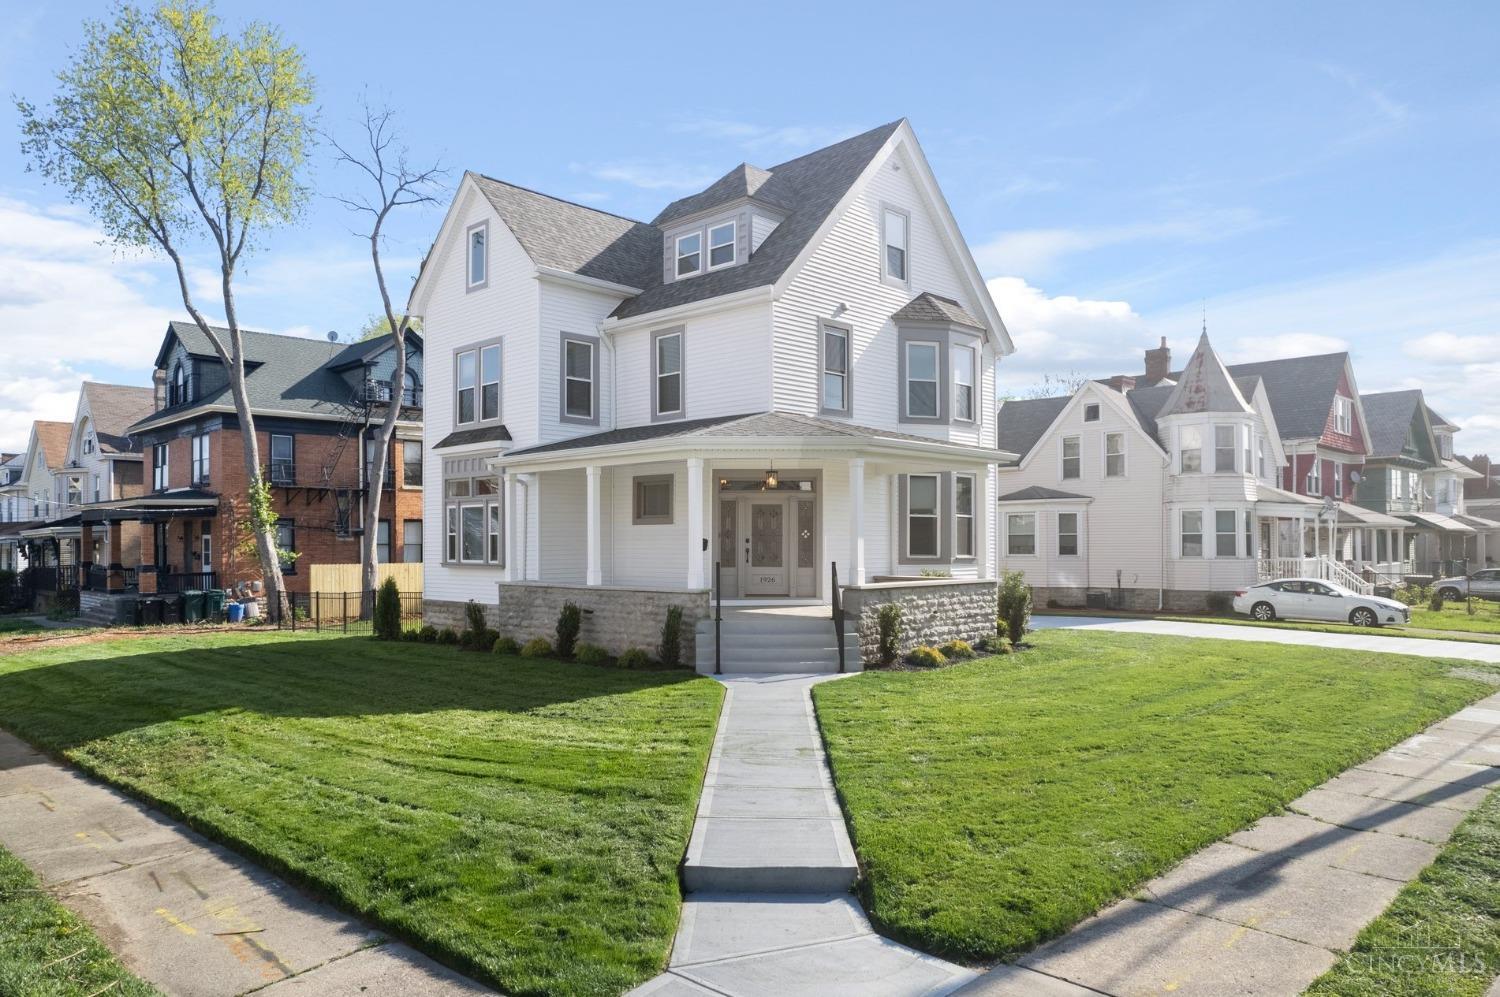 Can you say Curb Appeal? Yes, please! Stunning Renovation of this Urban Suburban Charmer w/ 5 BDs & 4 BAs @2,700 SF on 3 finished flrs w/ Dual HVAC Temp Zones. Beautifully done w/ a Designer level Floor Plan that will WOW you from top to bottom! New Gourmet, Eat-in Kitchen incl all the bells & whistles + Lg open Living space. Generously sized Master Suite w/ Dressing Rm & wall of Closets! Lg Light-filled Bedrms w/ such character + Ofc & Bonus Rm. Gorgeous Hardwd Flrs. New Lighting, Flring, Windows, Roof, HVACs, Elec, Plumbing, & more. Tax Abatement filed. Walk to Wasson Way Bike/Run/Walk Trl, Brewery + Mins to Hyde Pk Sq, OTR+